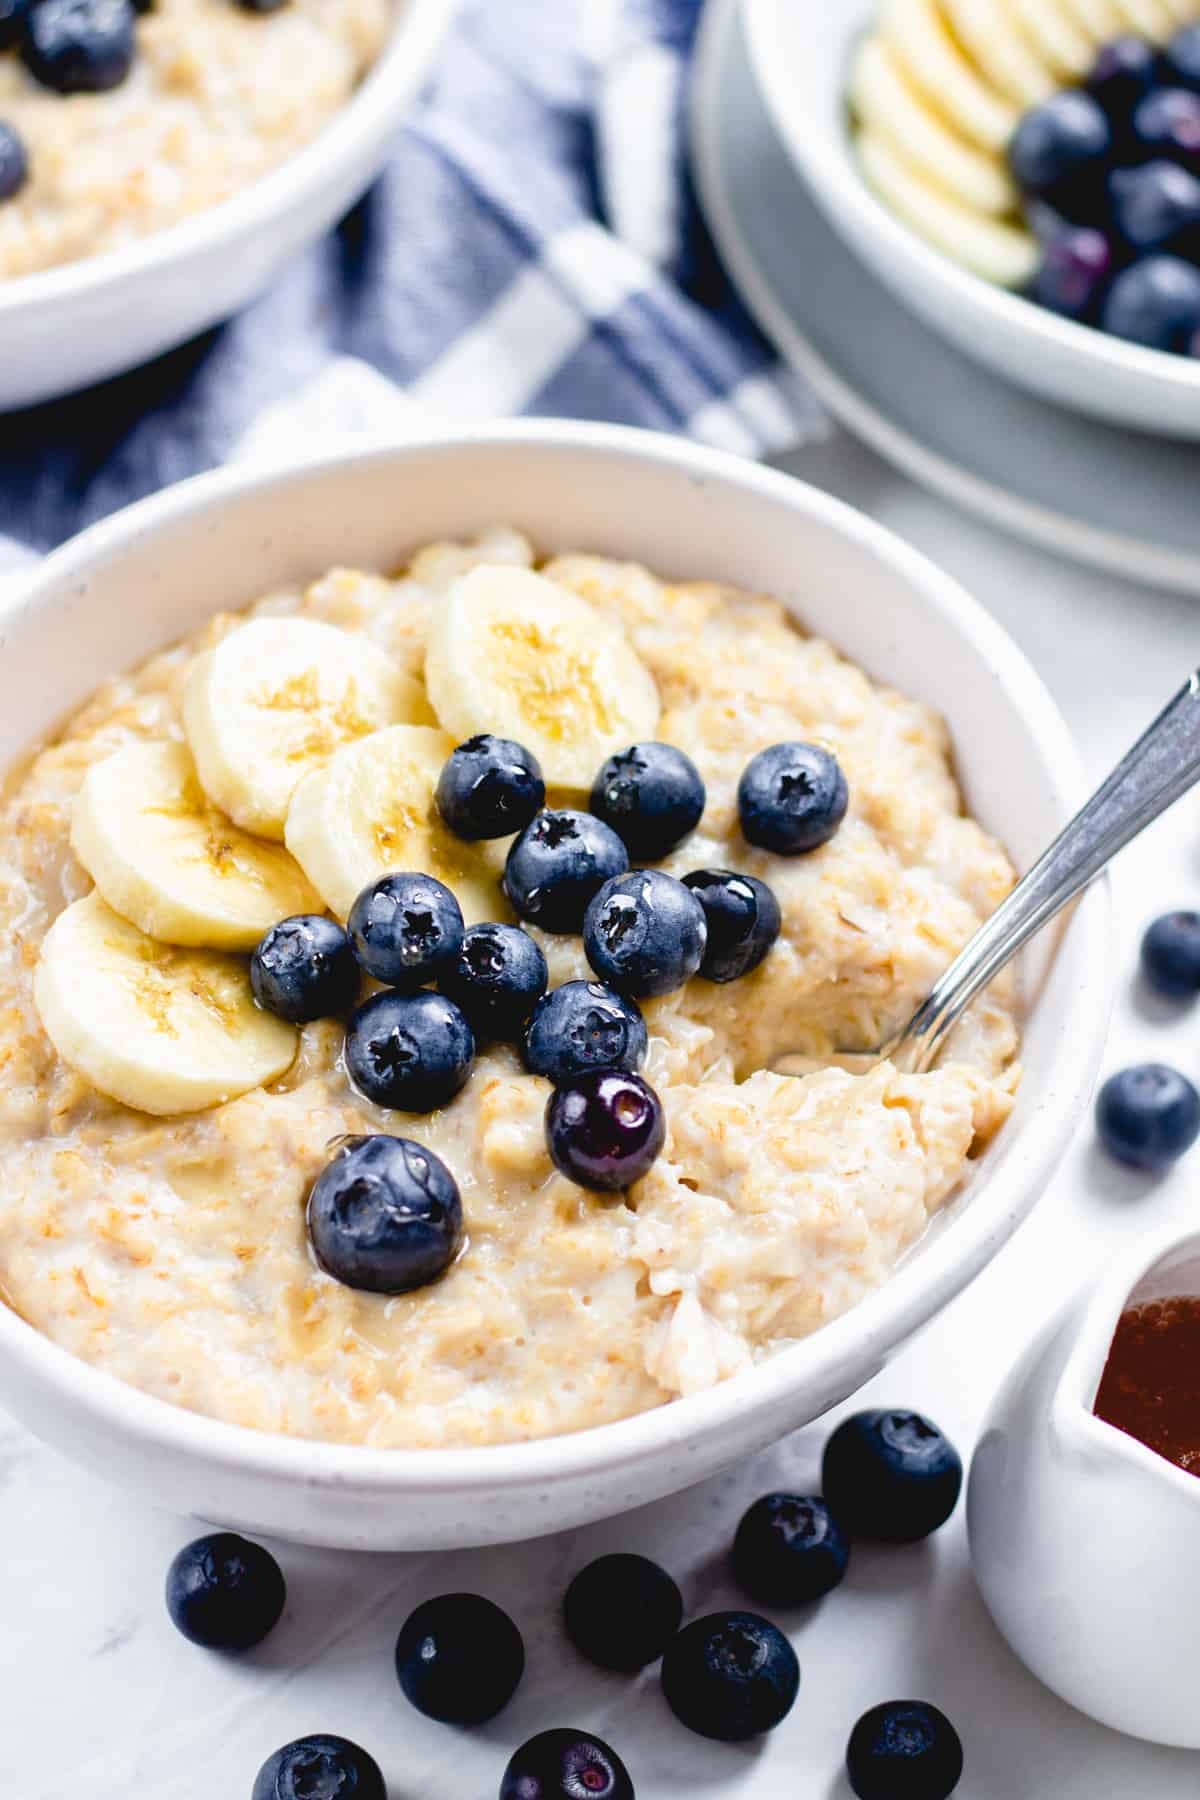 Oatmeal , topped with bananas and blueberries in a bowl.